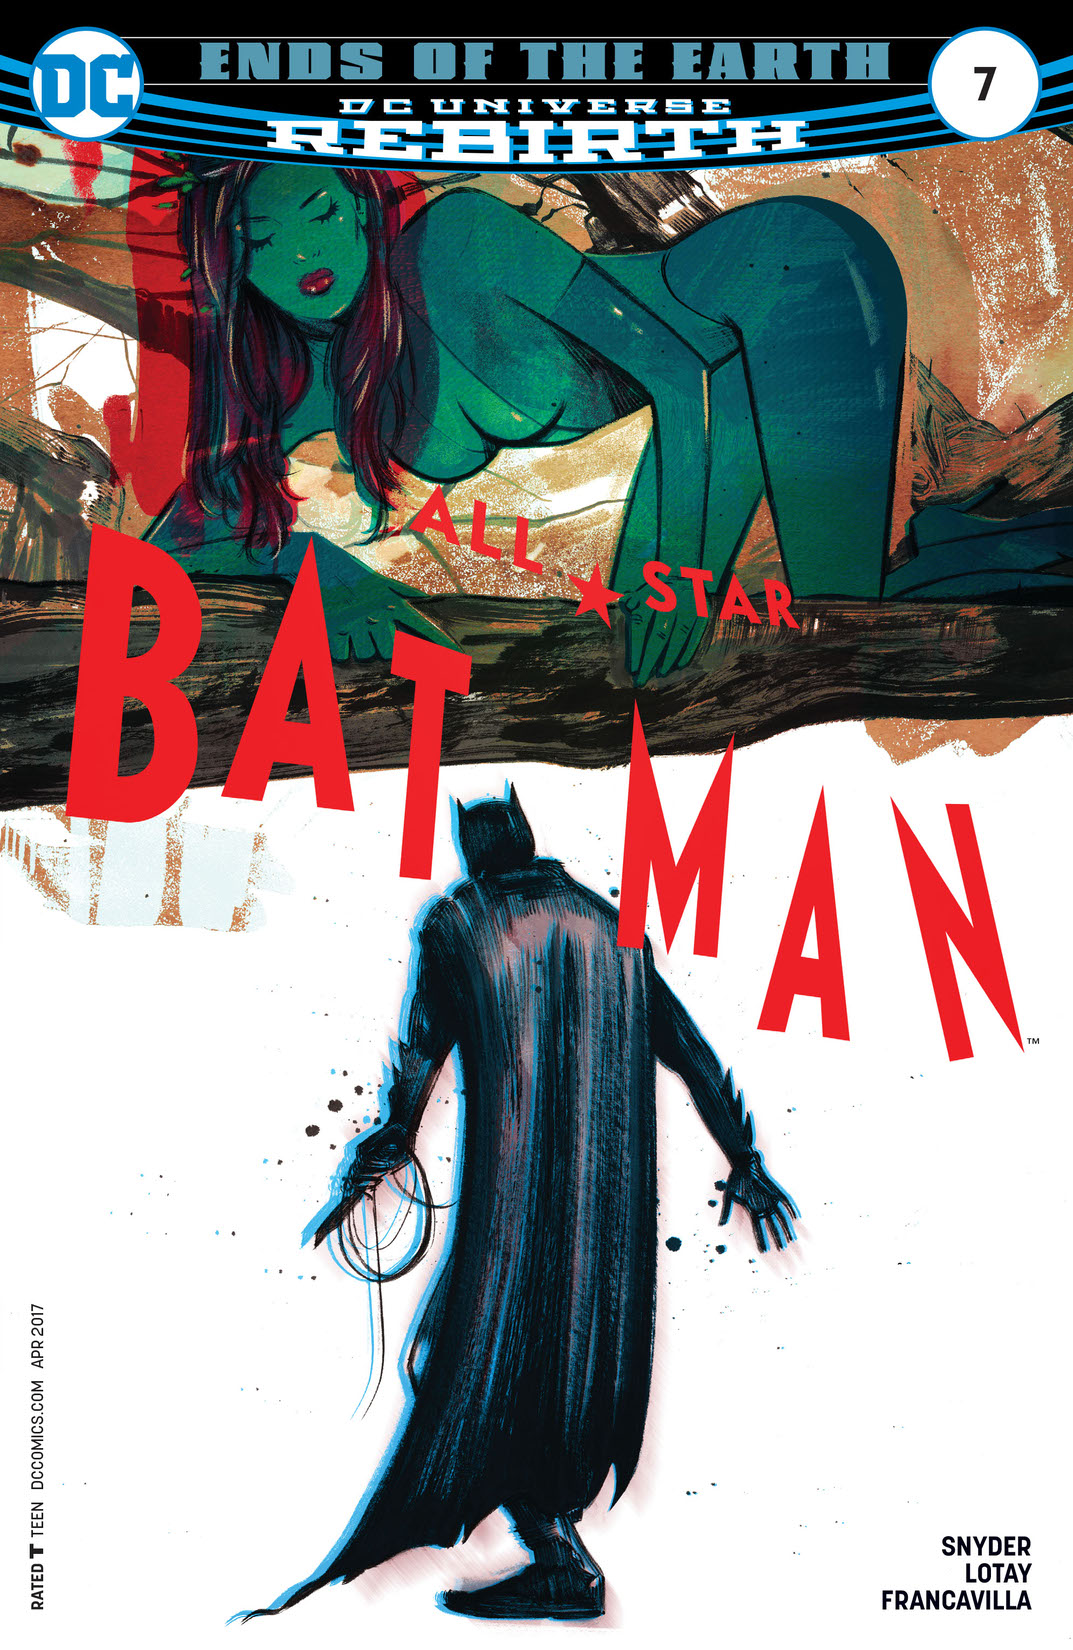 All Star Batman #7 preview images